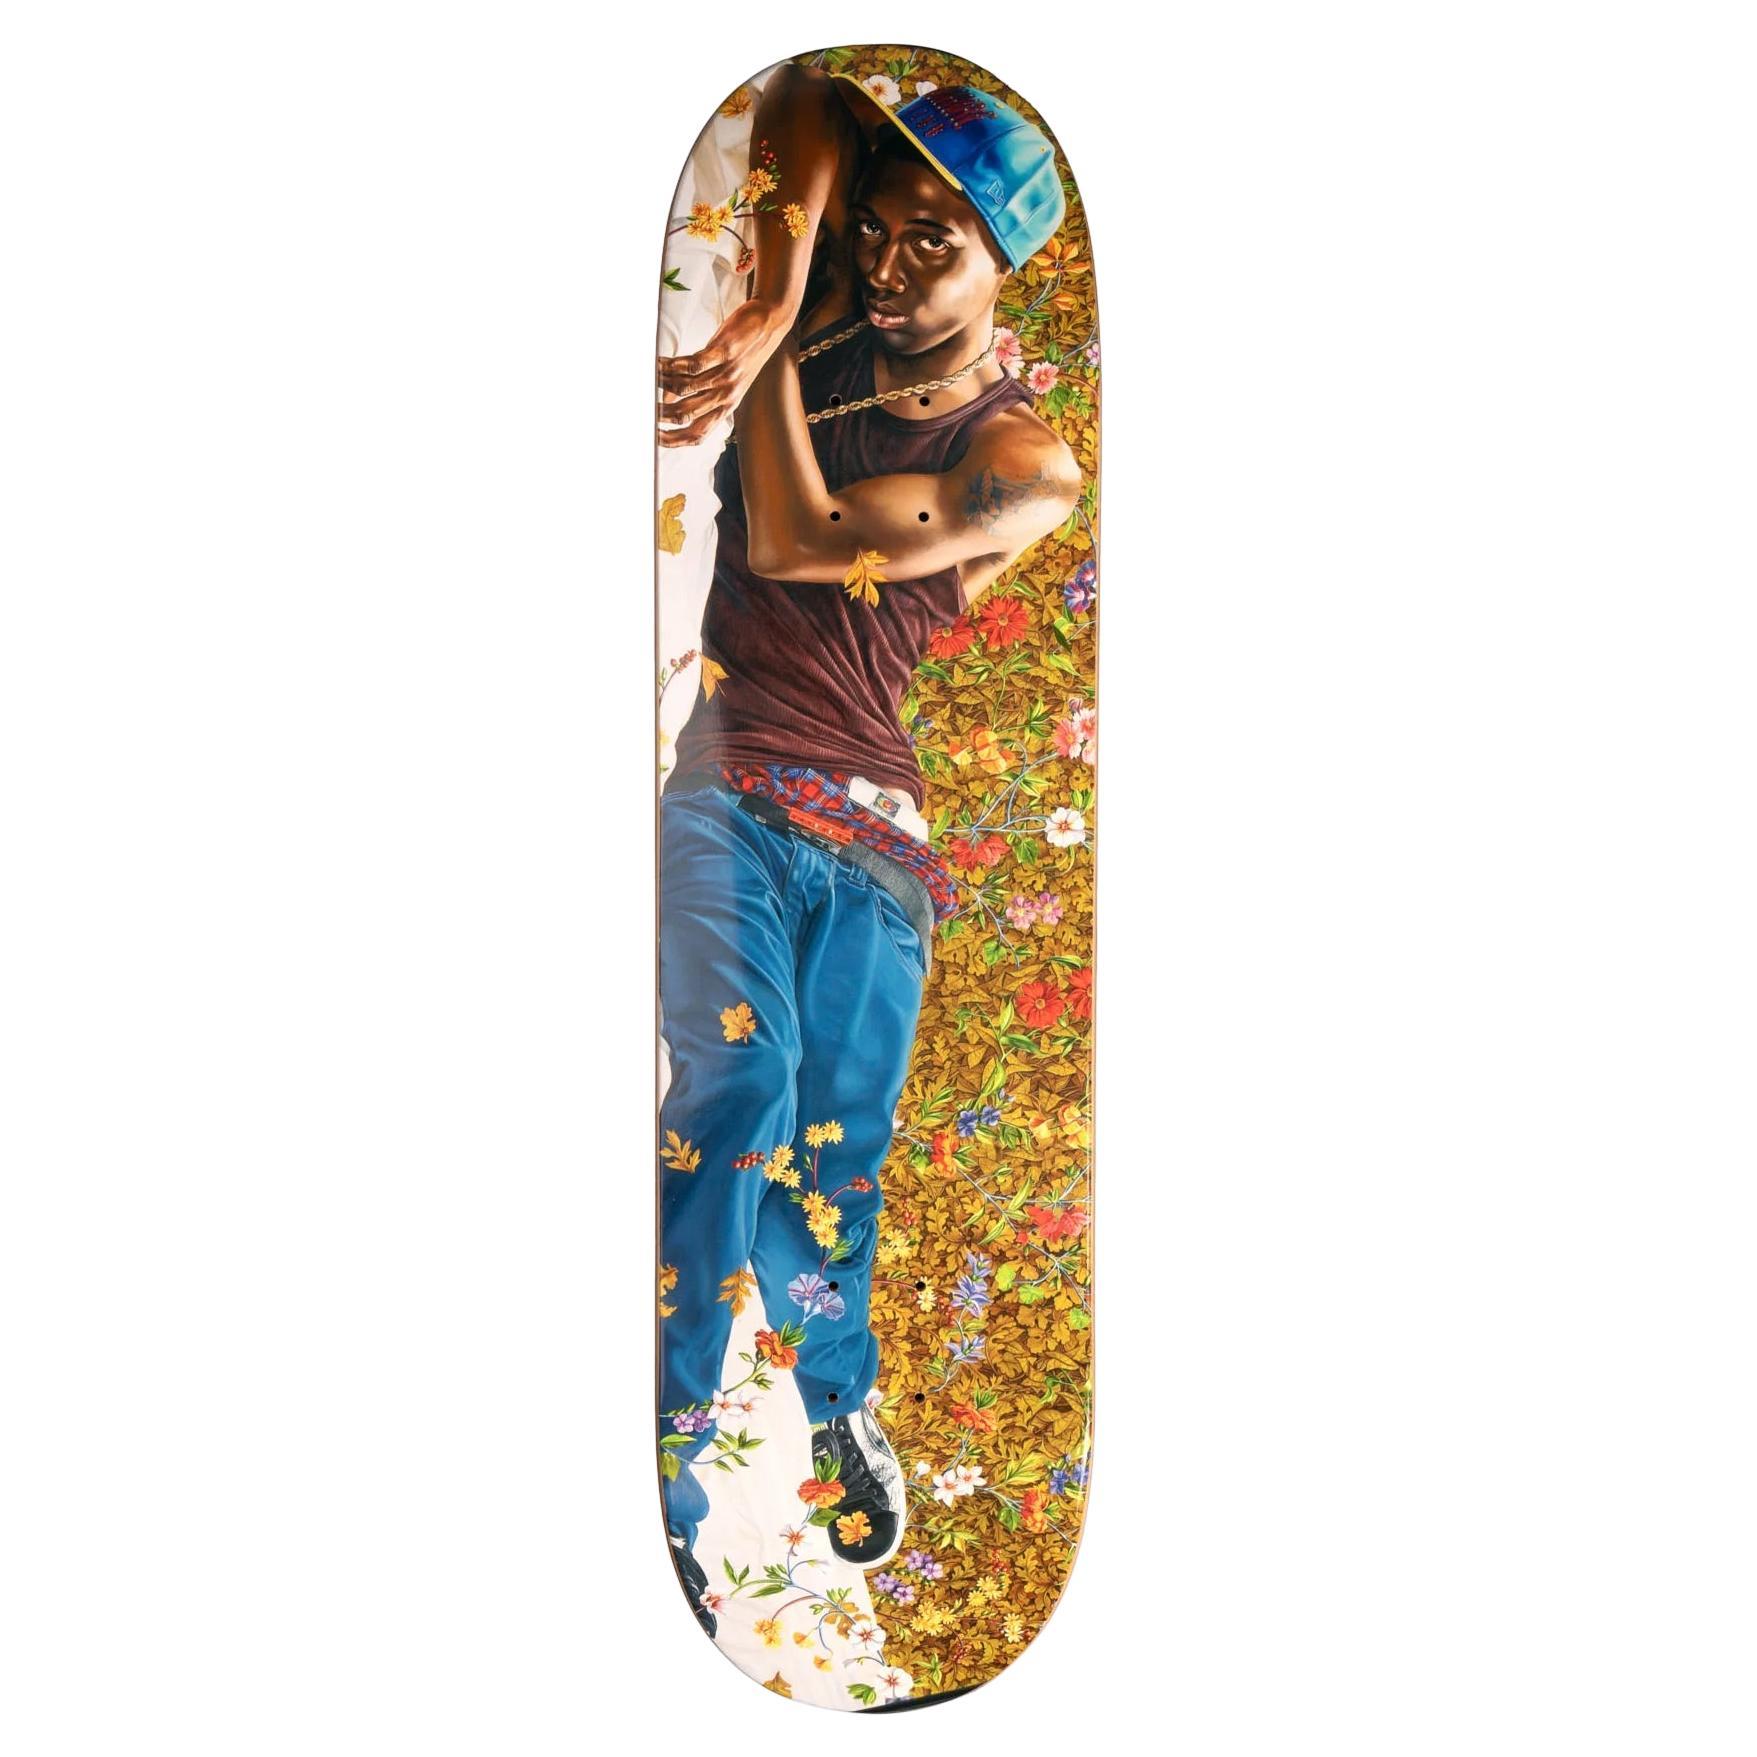 Morpheus Skateboard Deck by Kehinde Wiley For Sale